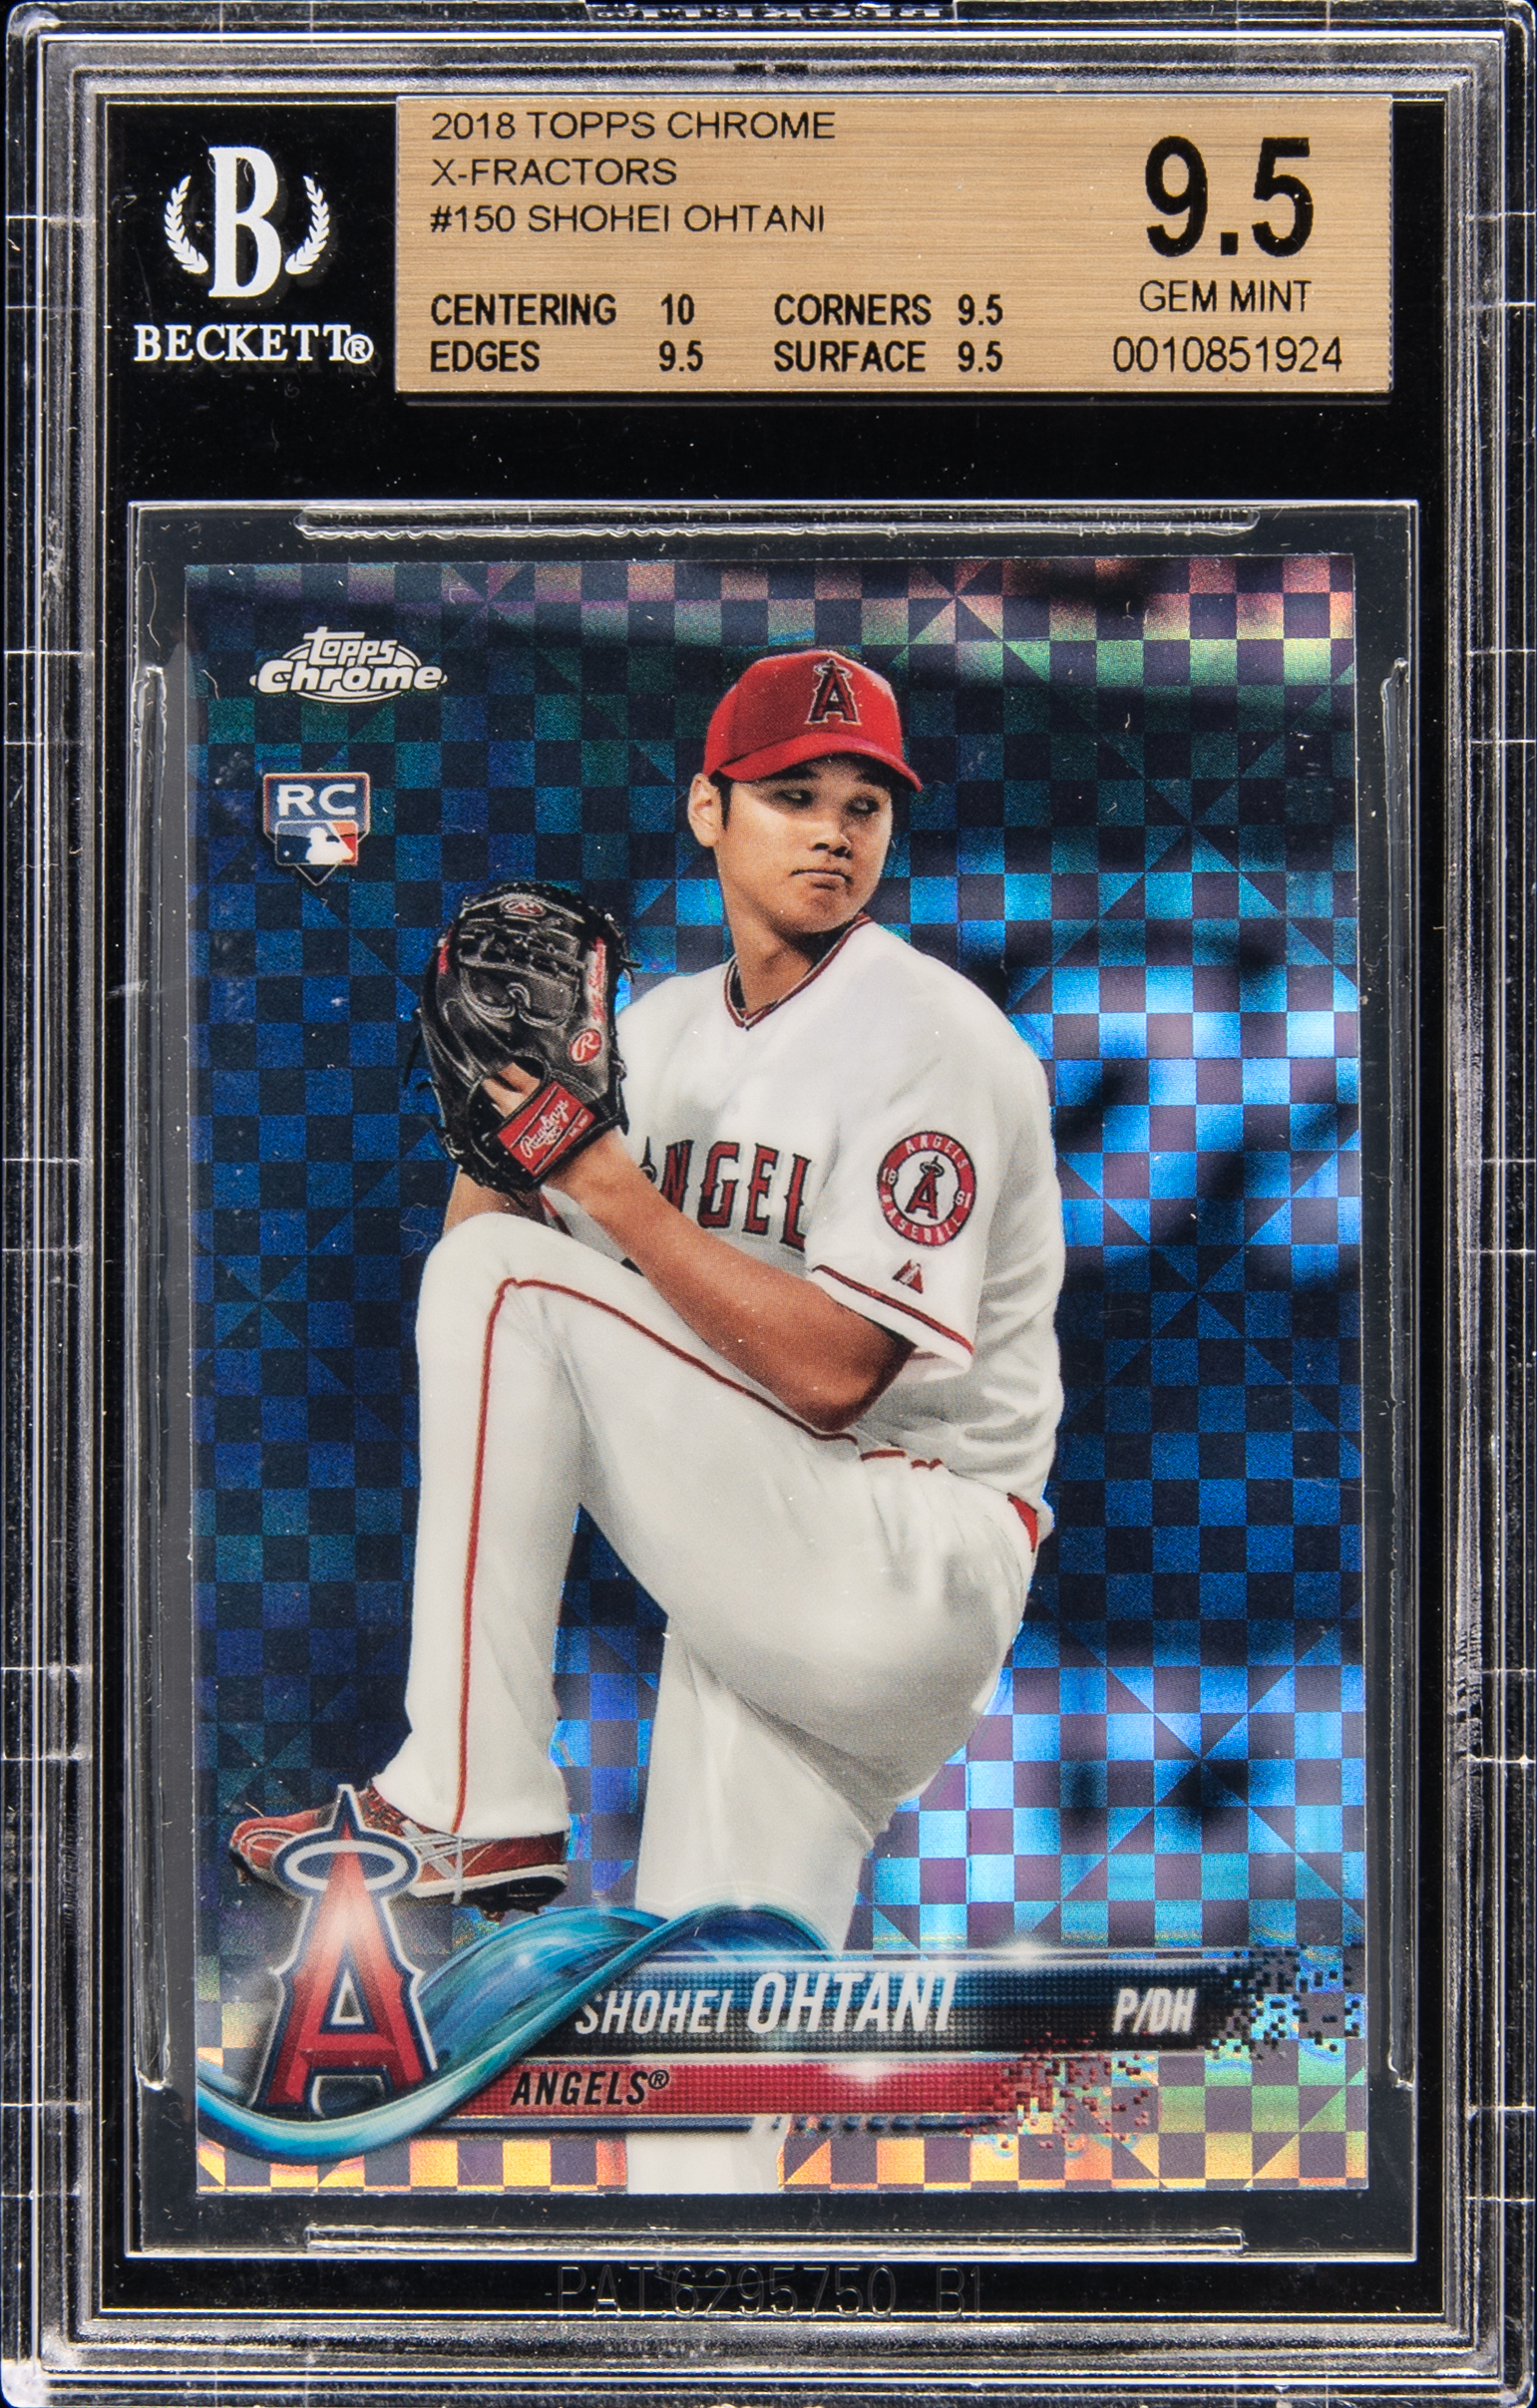 2018 Topps Chrome Pitching-X-Fractor #150 Shohei Ohtani Rookie Card Rc – BGS GEM MINT 9.5